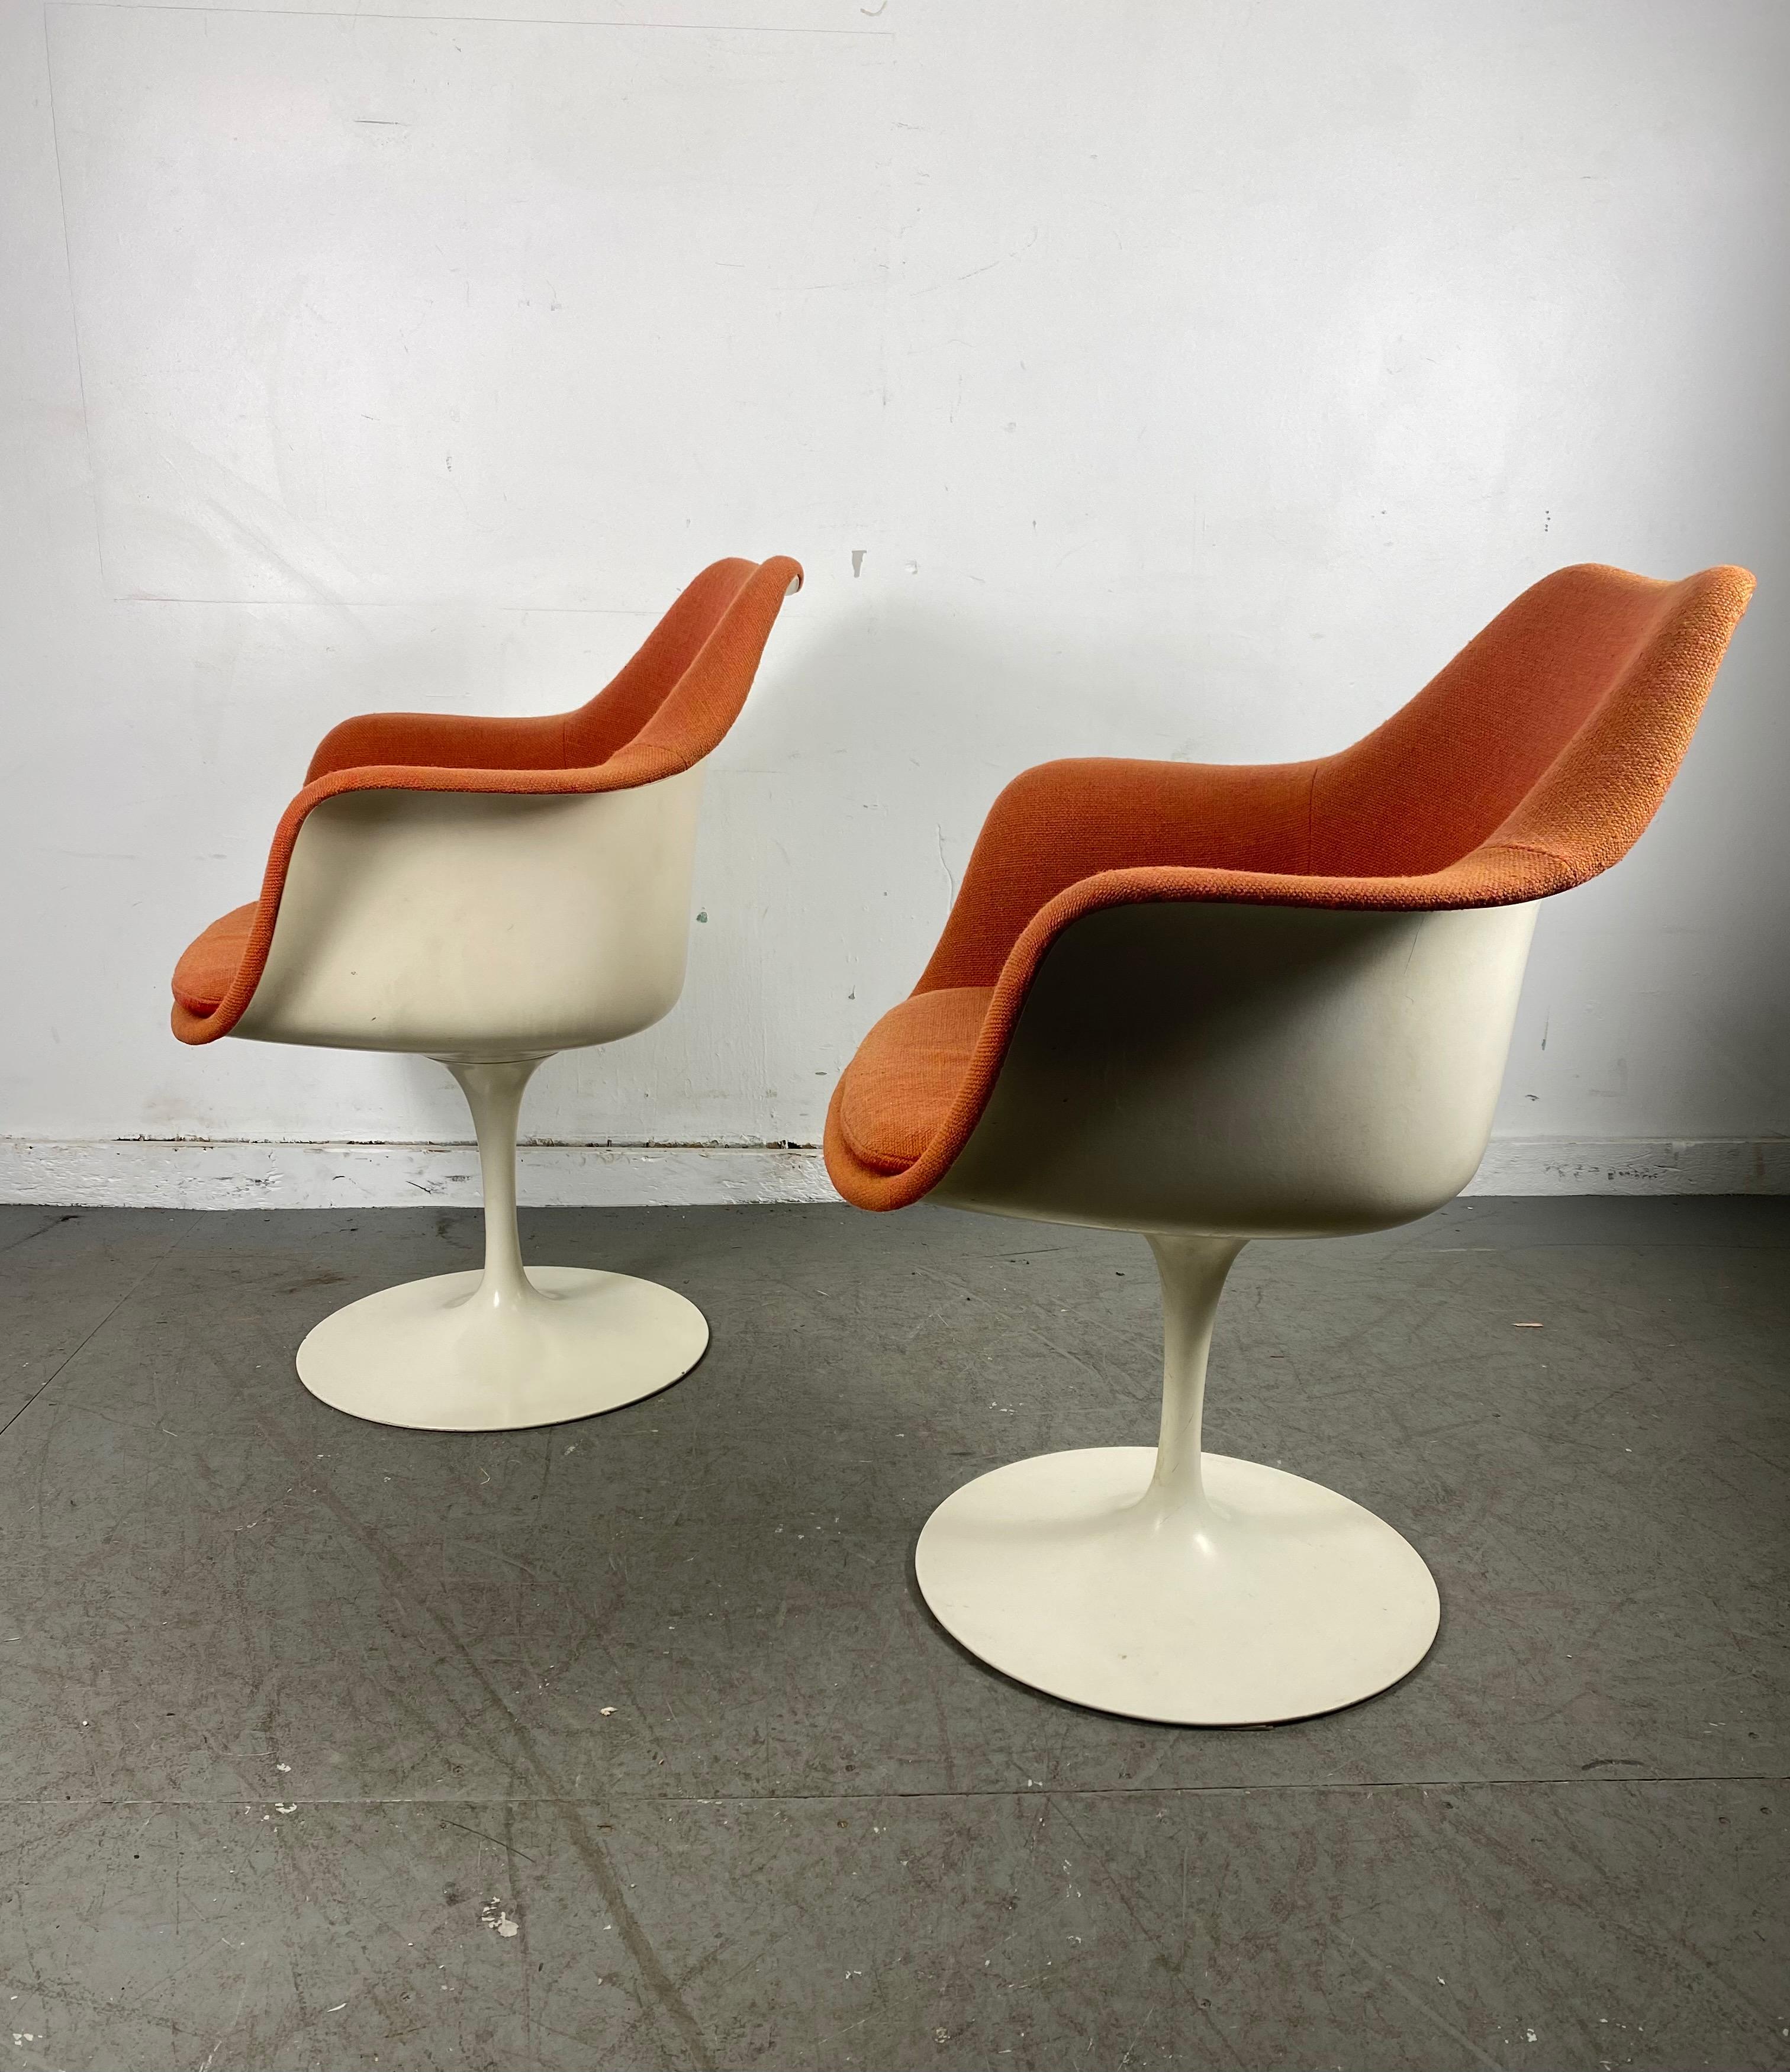 Seldom seen pair of Eero Saarinen upholstered Tulip arm chairs manufactured by Knoll. Retain original orange knoll fabric, also retains early Knoll labels, nice original condition, minor blemishes to seat pads (see photo) also minor fading to arms.